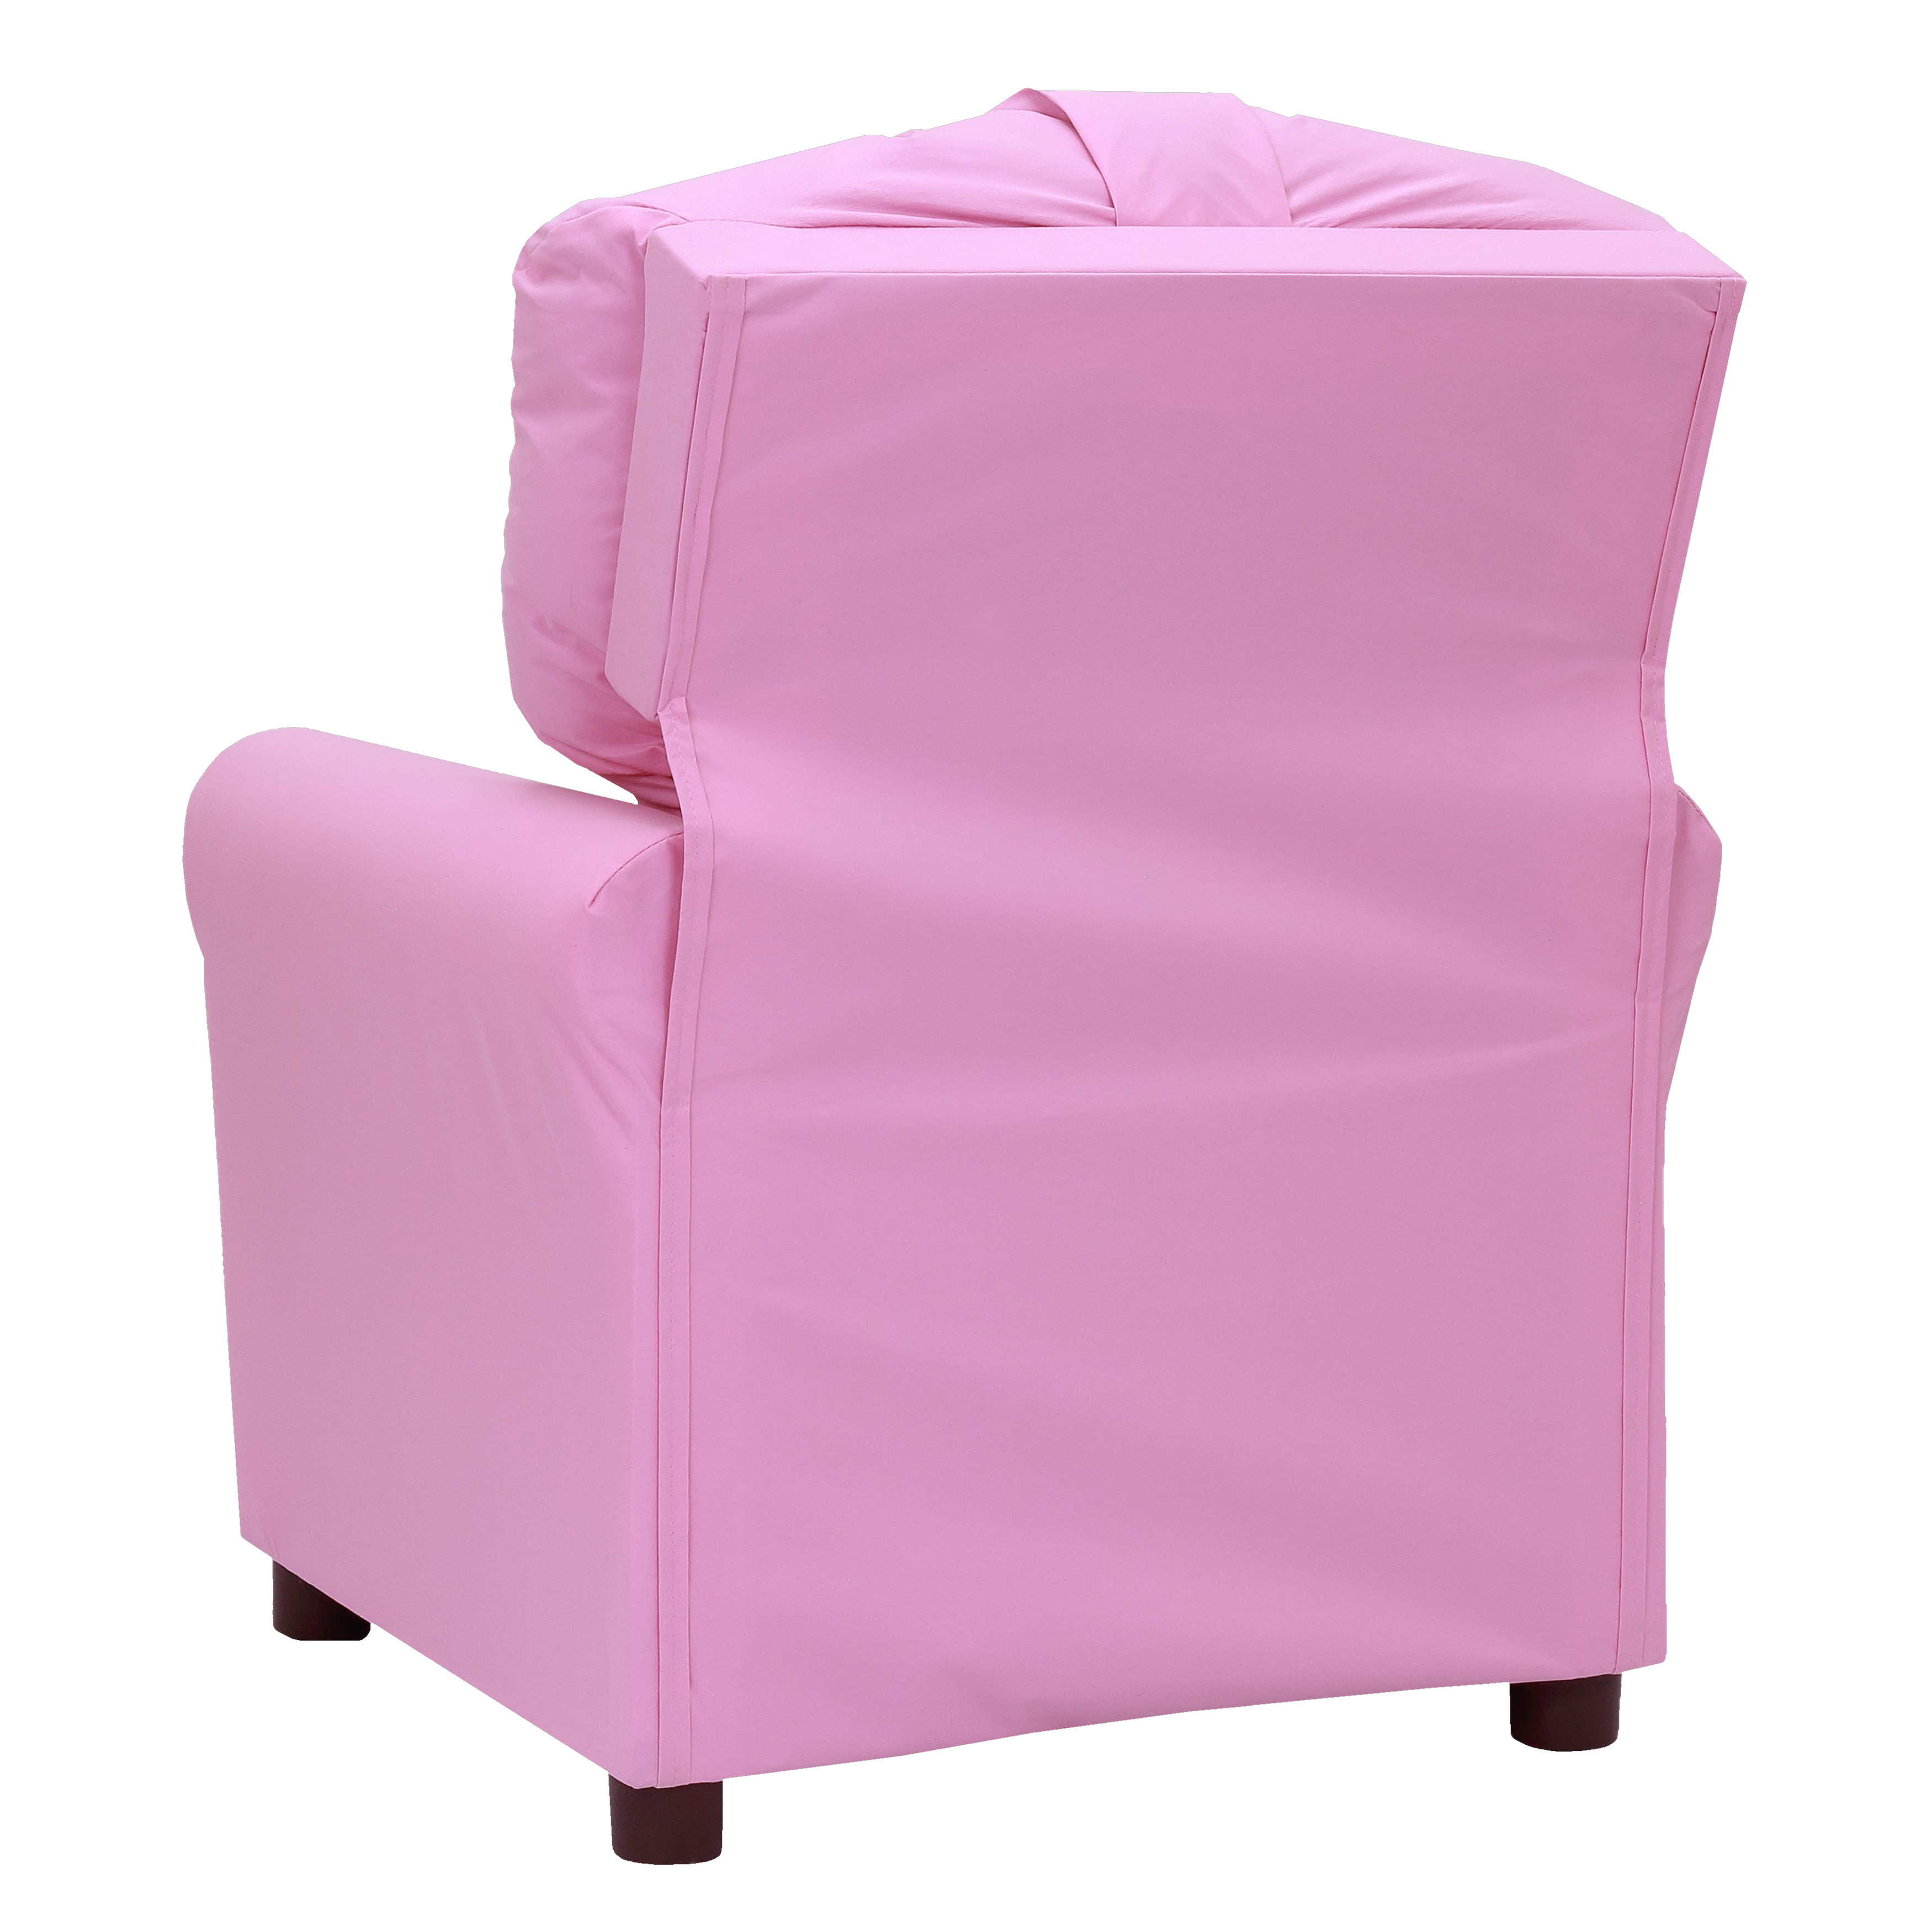 Crew Traditional Kids Recliner Chair, Multiple Colors - image 4 of 9